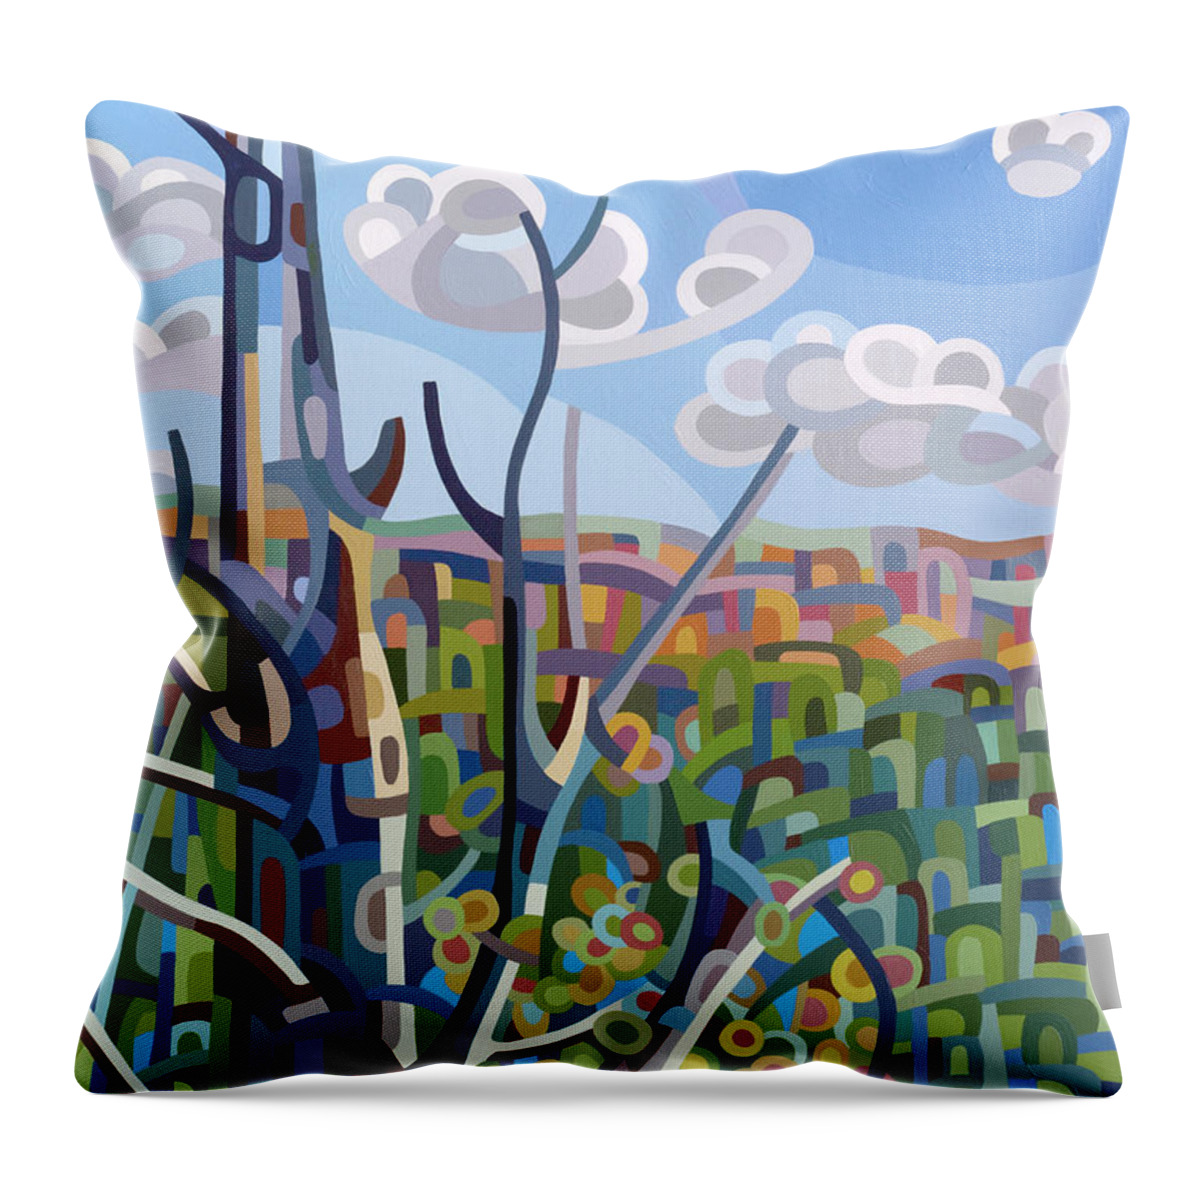 Fine Art Throw Pillow featuring the painting Hockley Valley by Mandy Budan